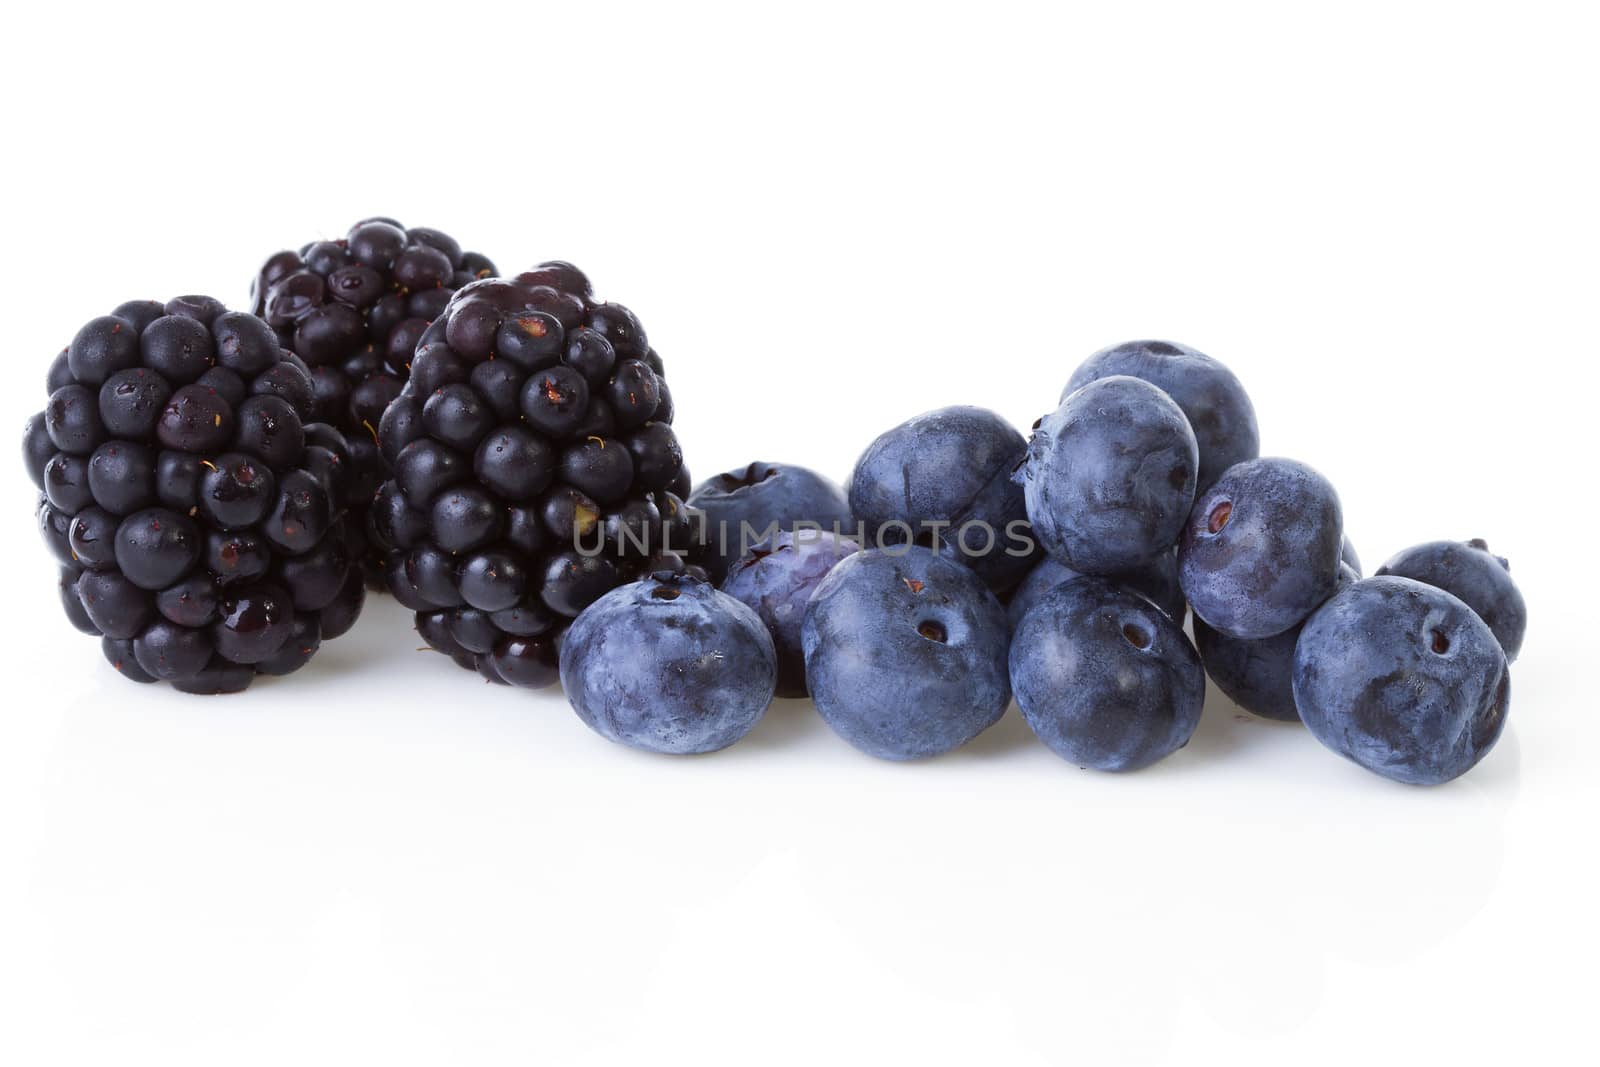 Macro of blackberries and currant berries over white background